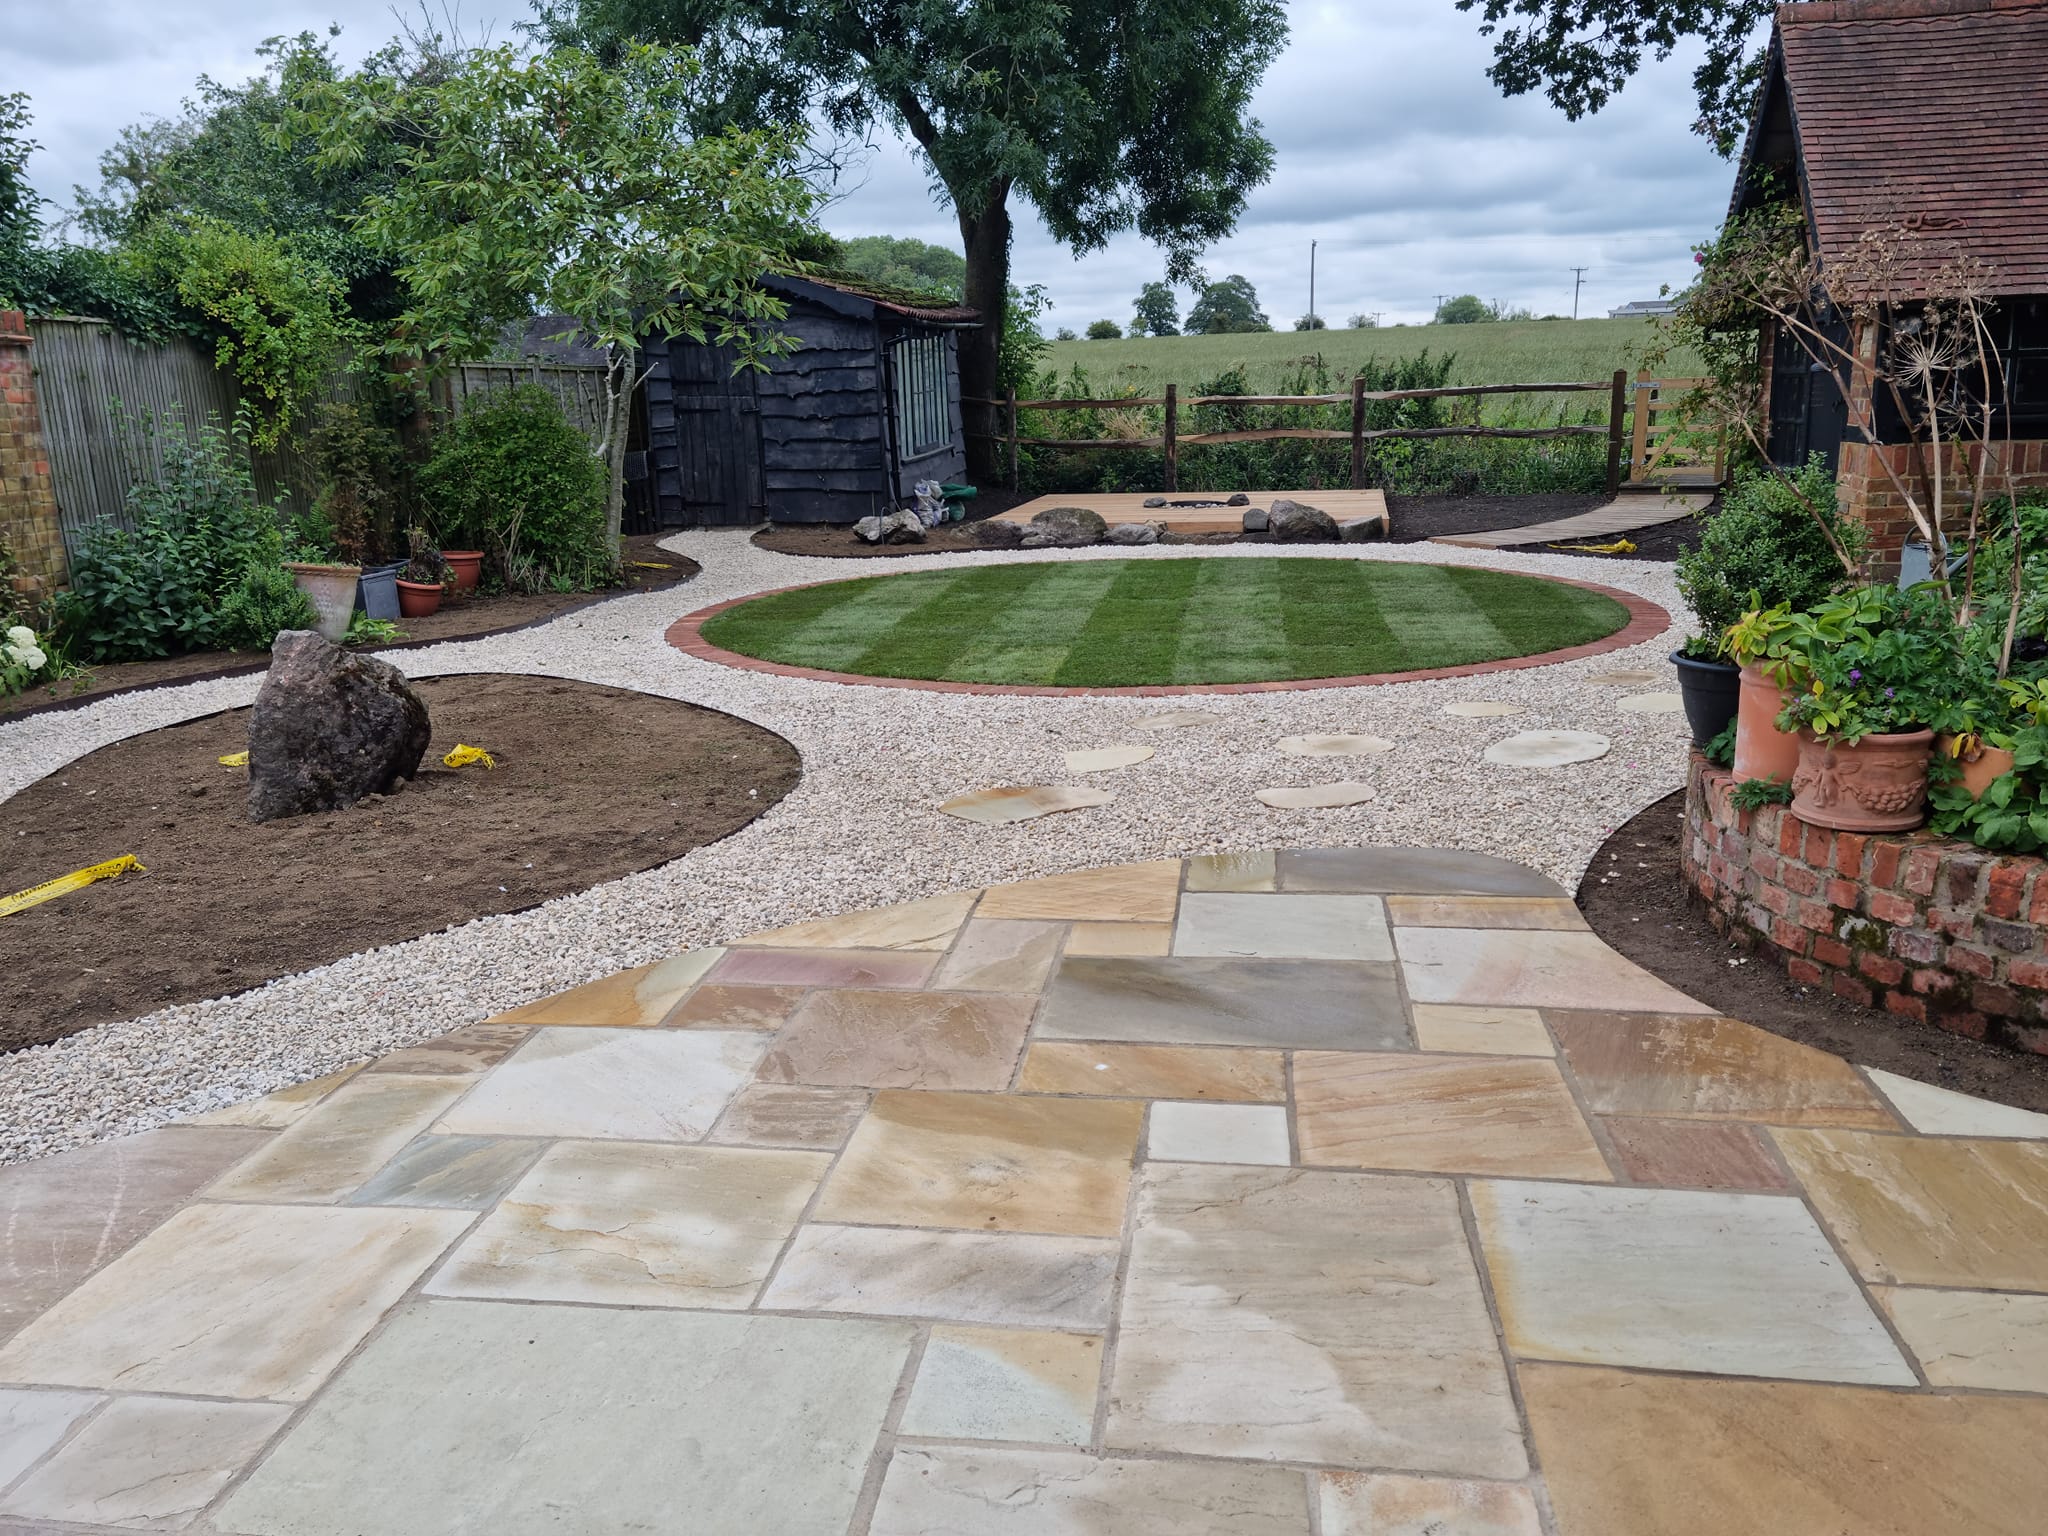 Baker Landscaping - Oxfordshire and surrounding areas